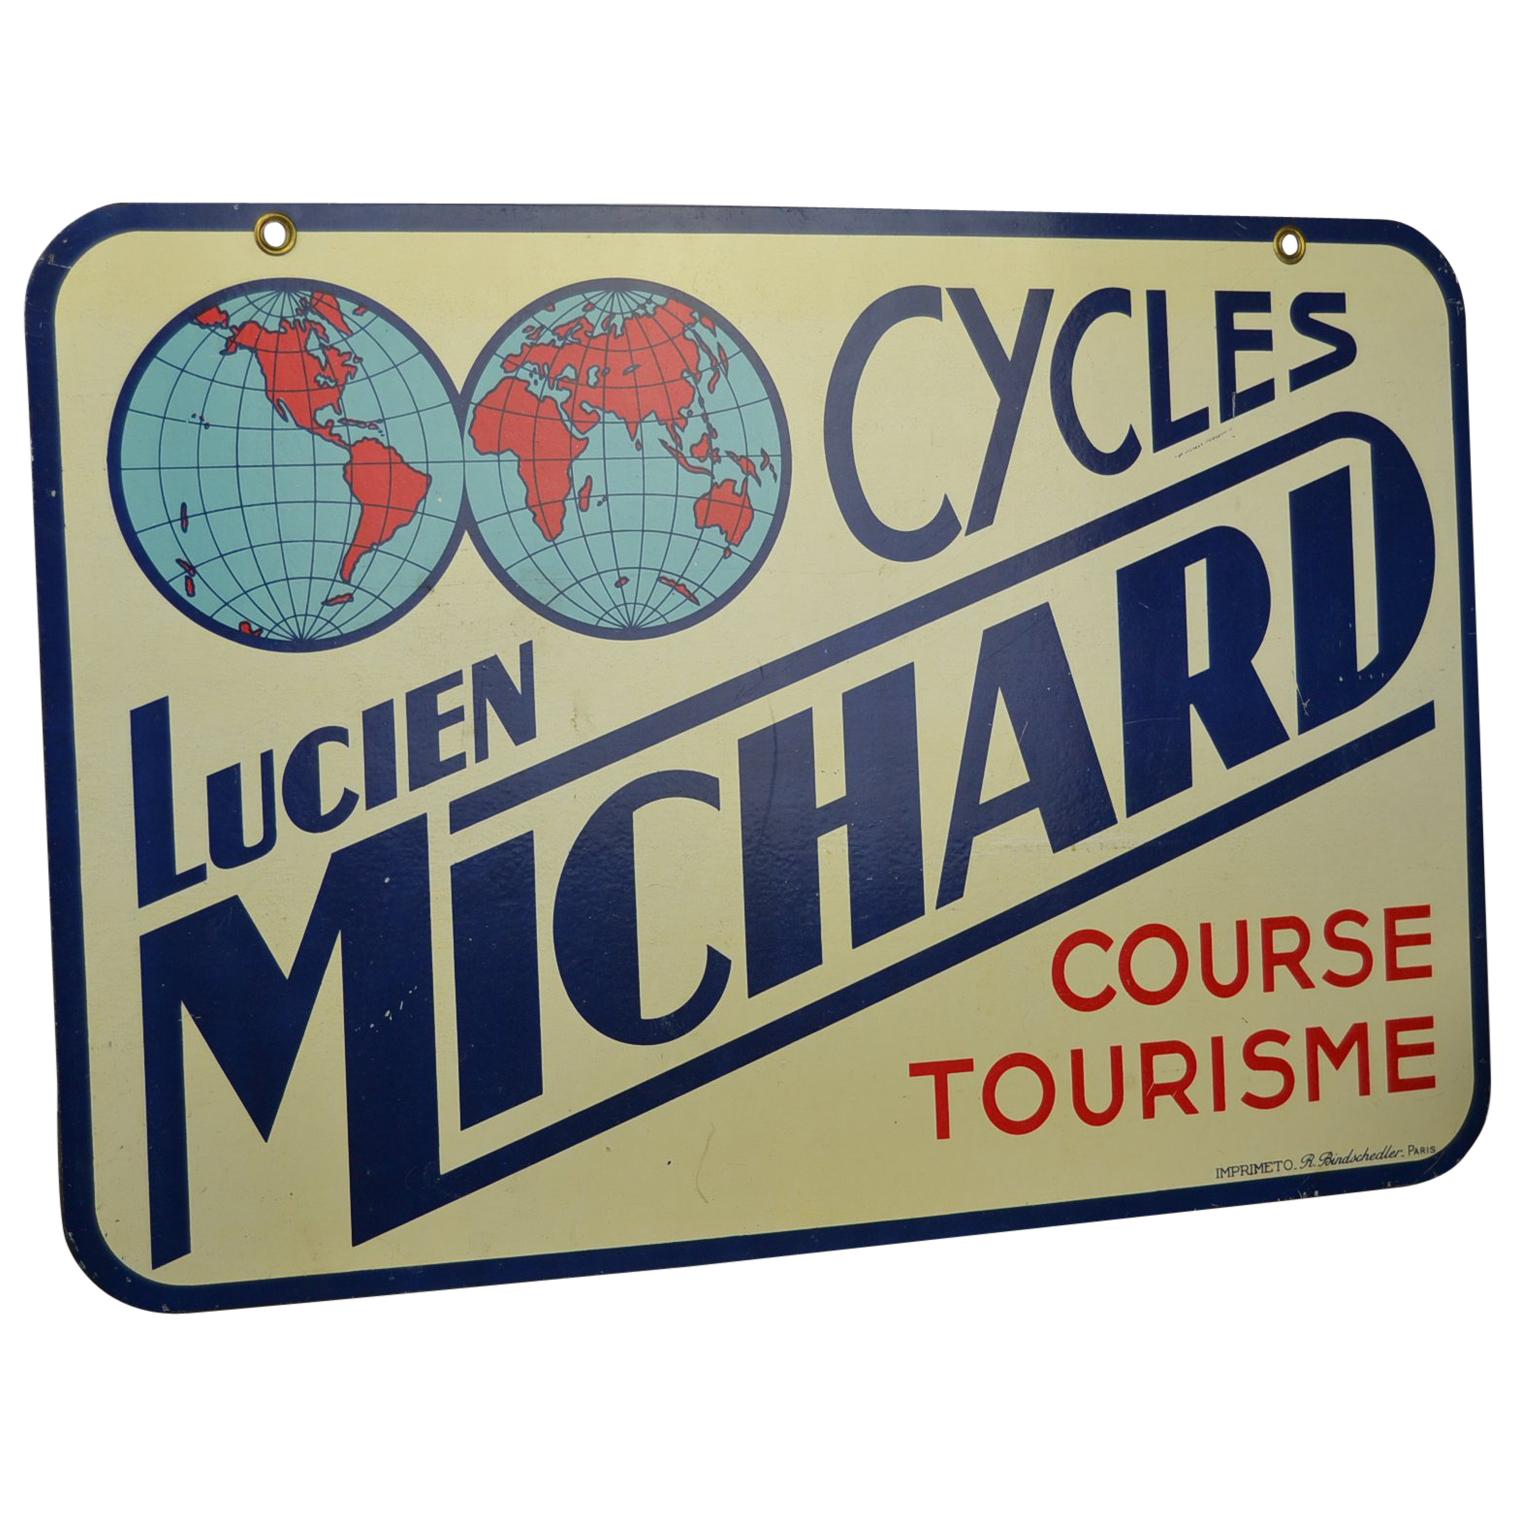 Double-Sided Metal Trade Sign for Cycles Lucien Michard, France, 1950s